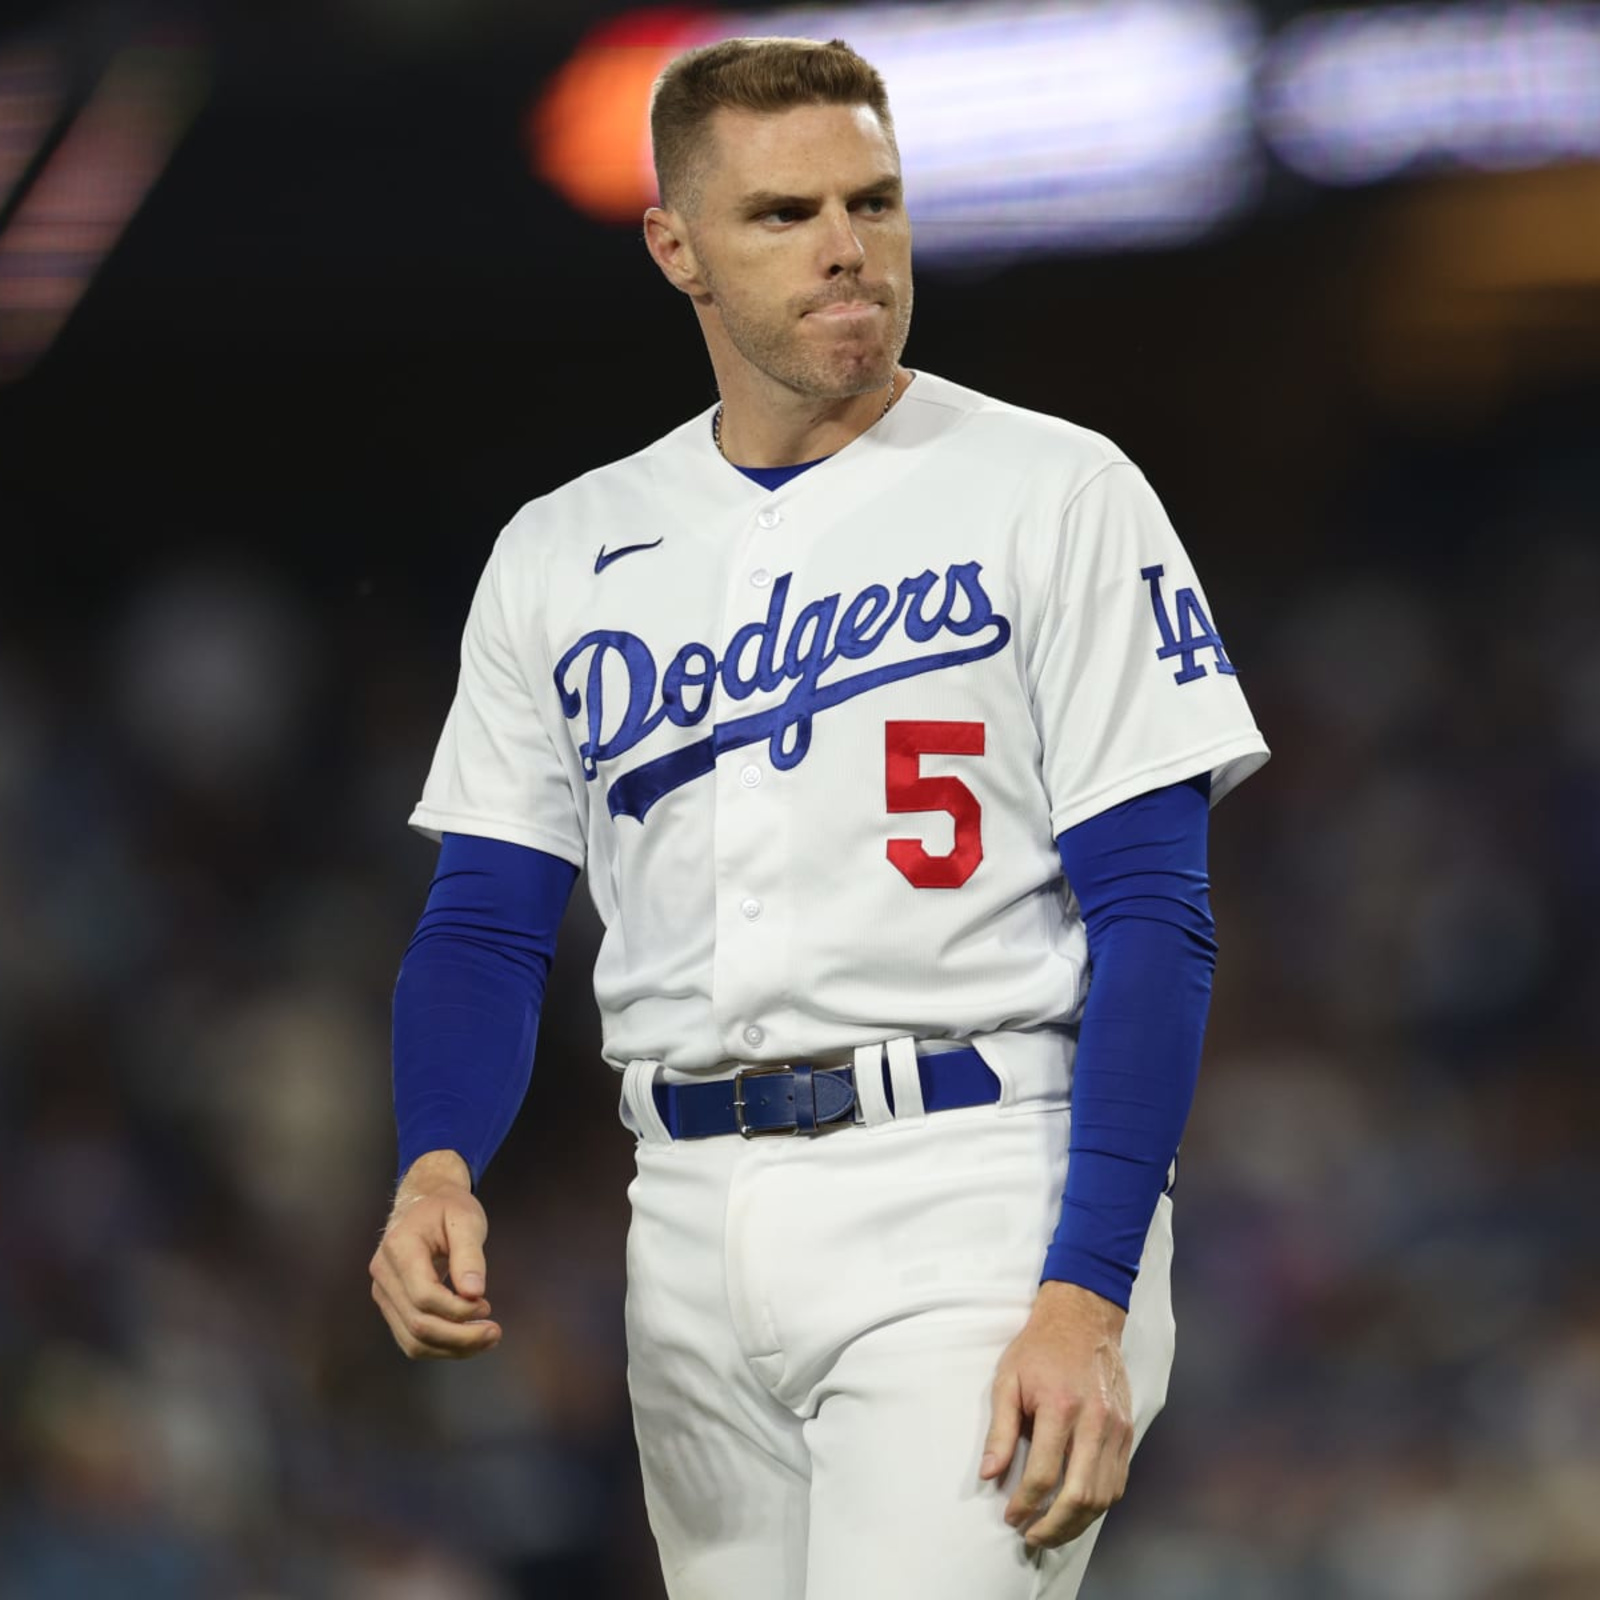 Dodgers' Offense Called Out by Fans as Diamondbacks Take 2-0